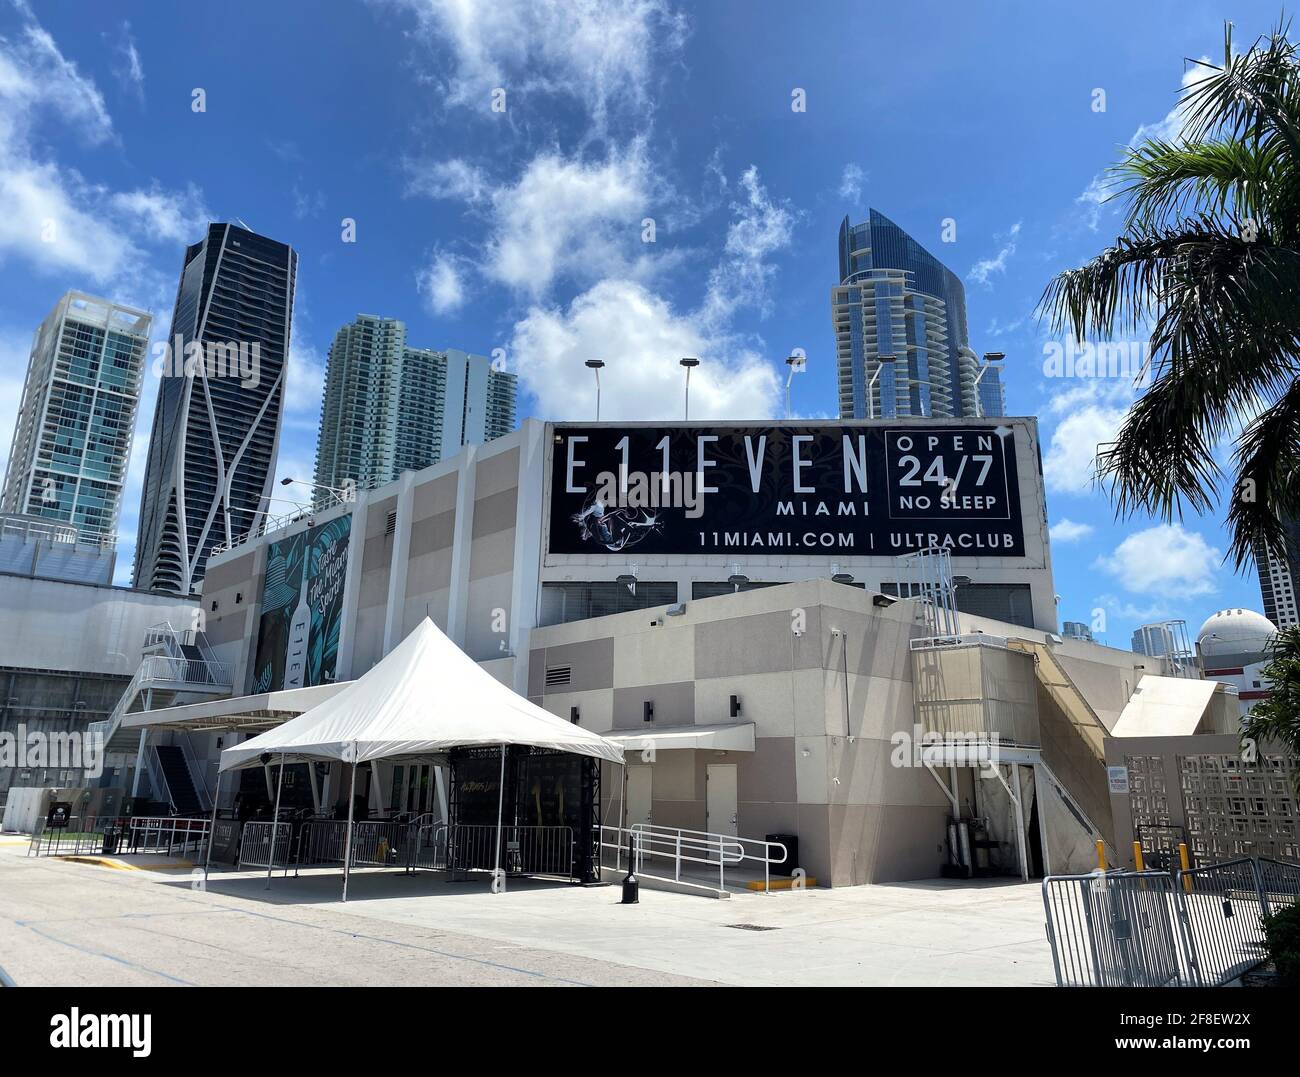 Live in miami hires stock photography and images Alamy